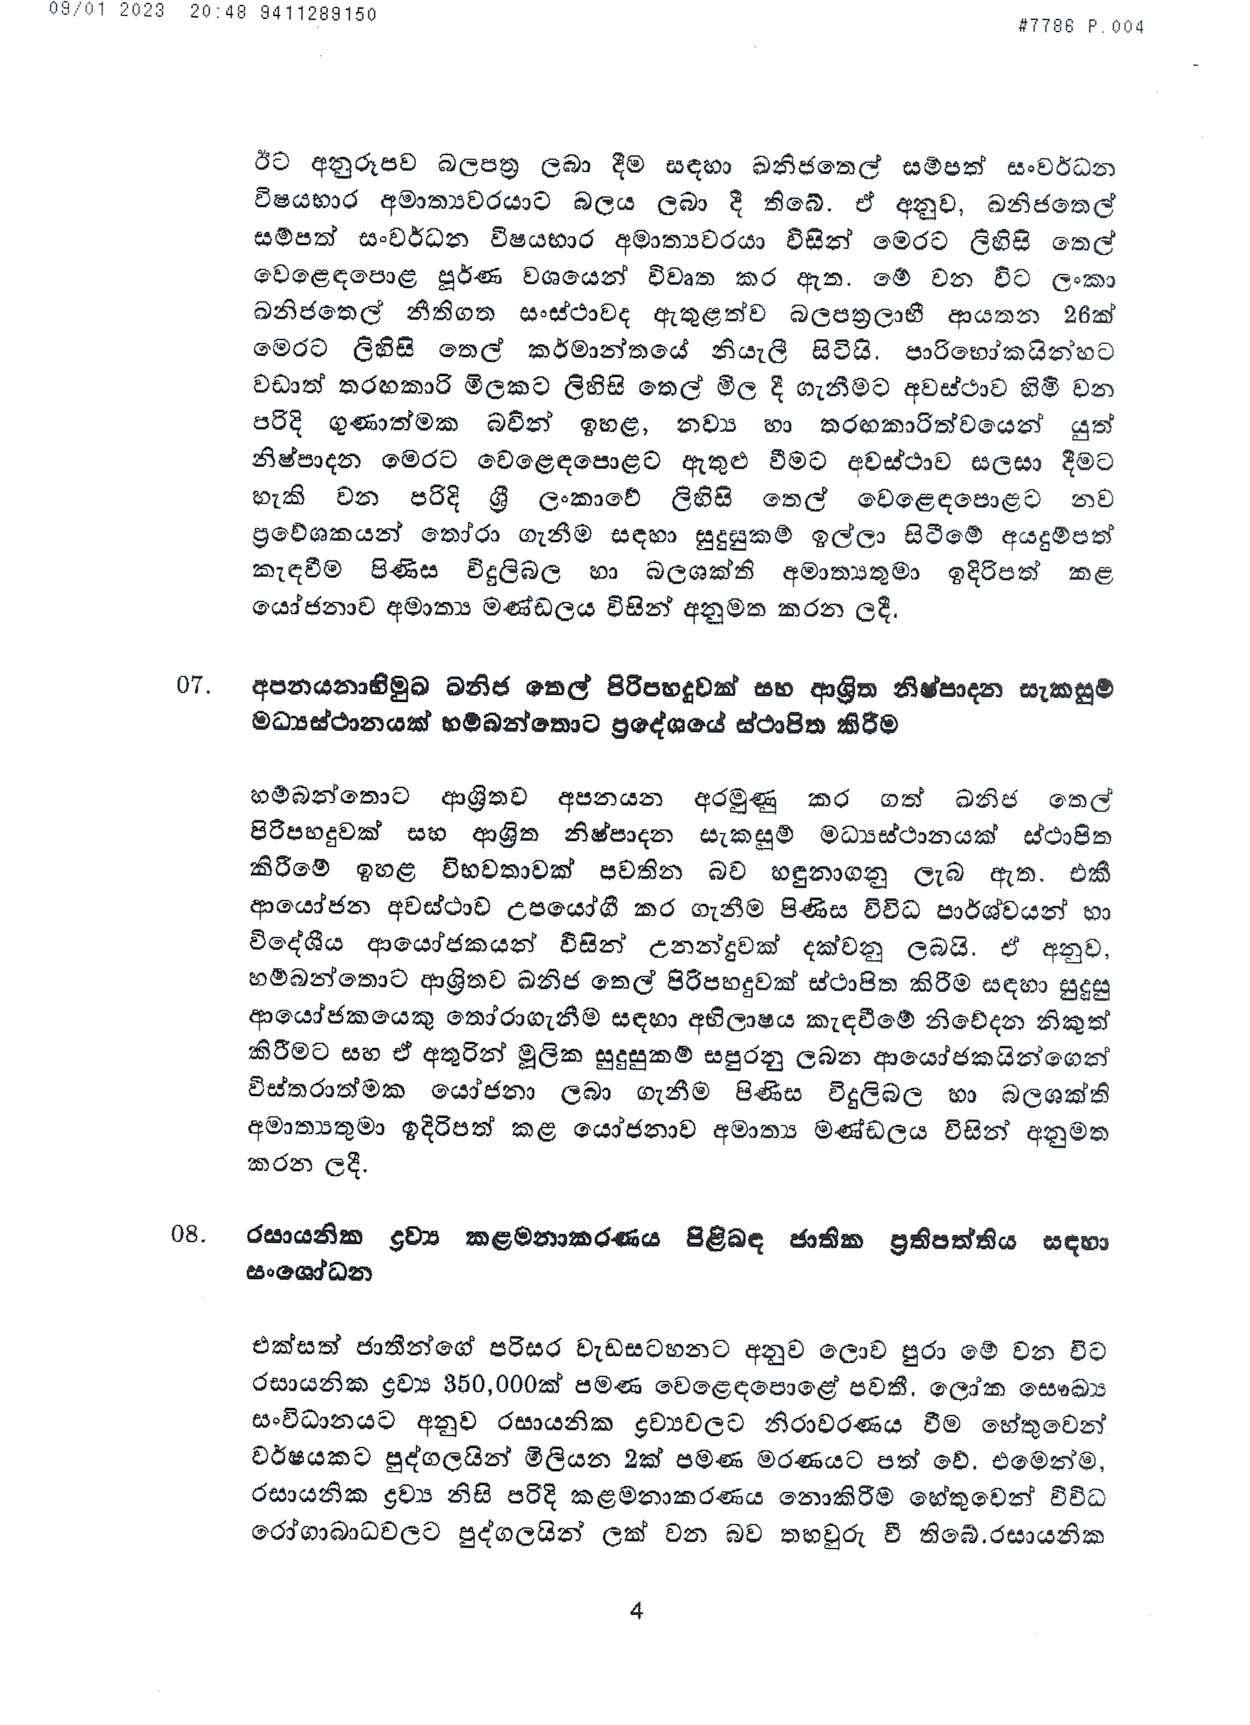 Cabinet Decision on 09.01.2023 page 004